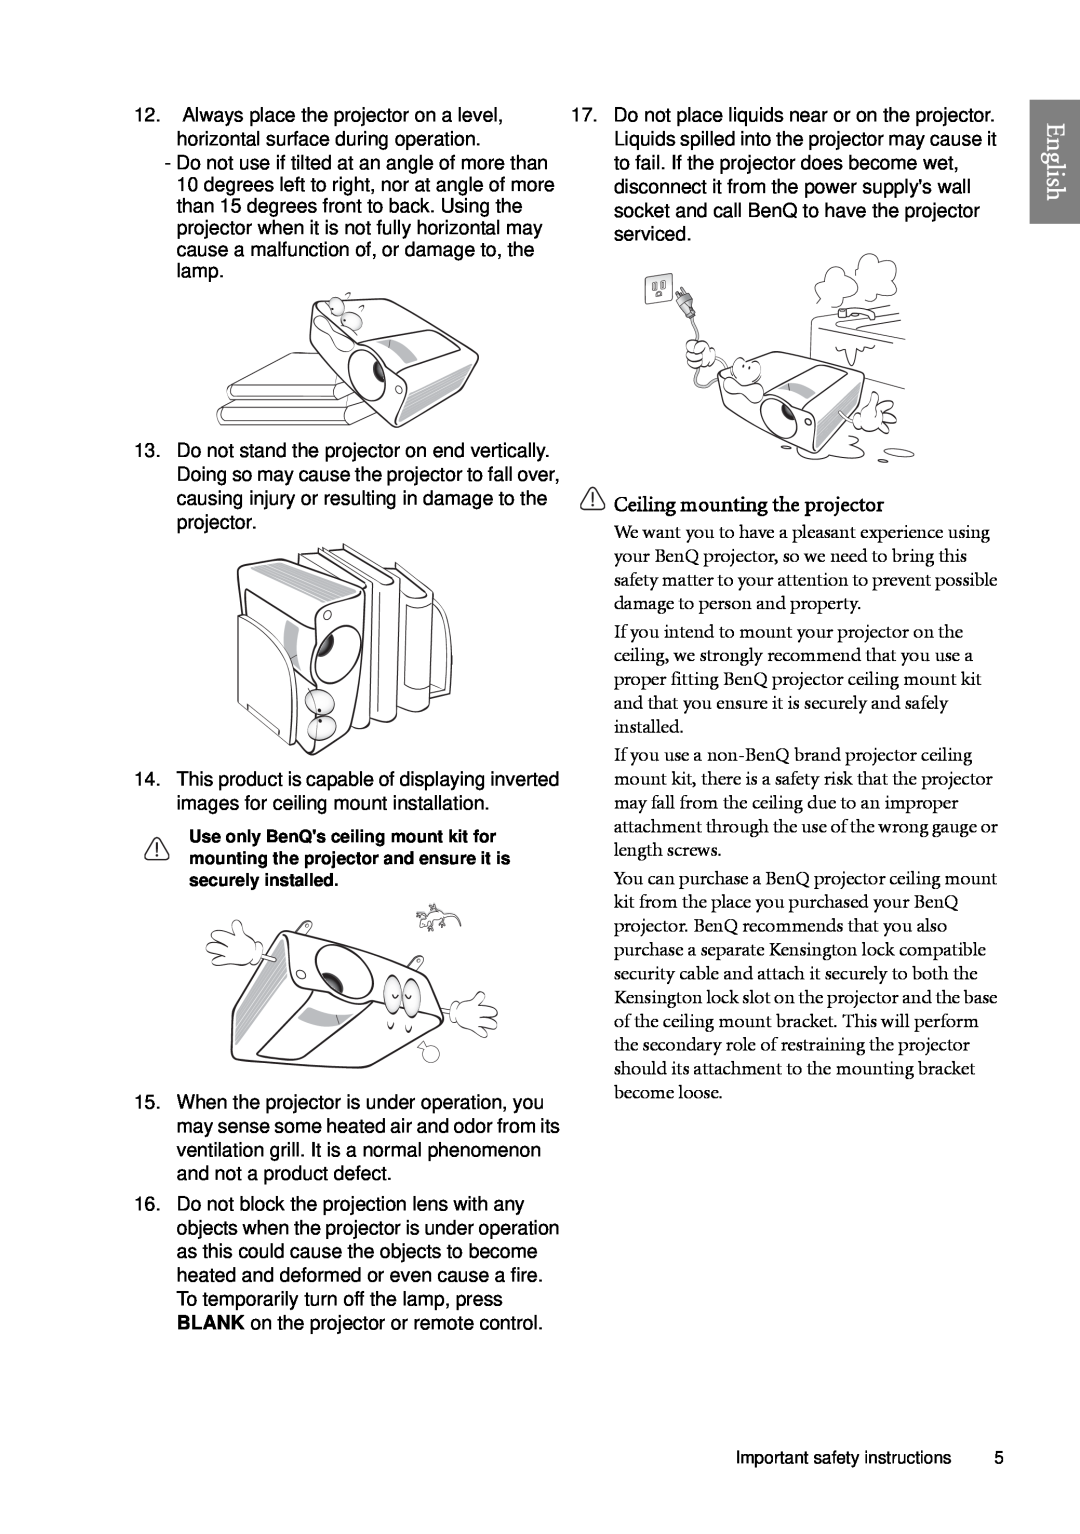 BenQ SP920 user manual English, Ceiling mounting the projector 